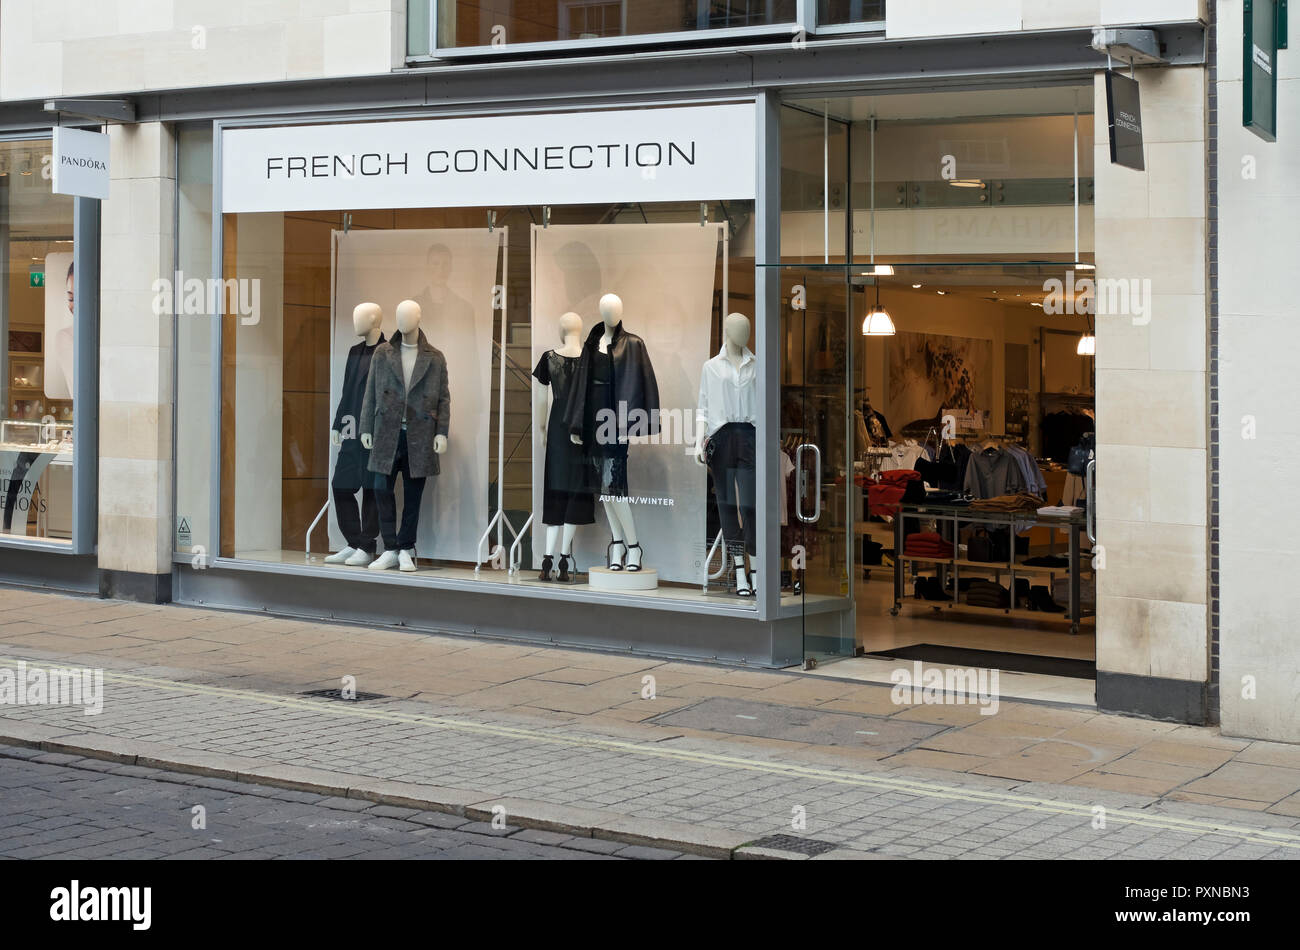 French Connection clothes fashion ...